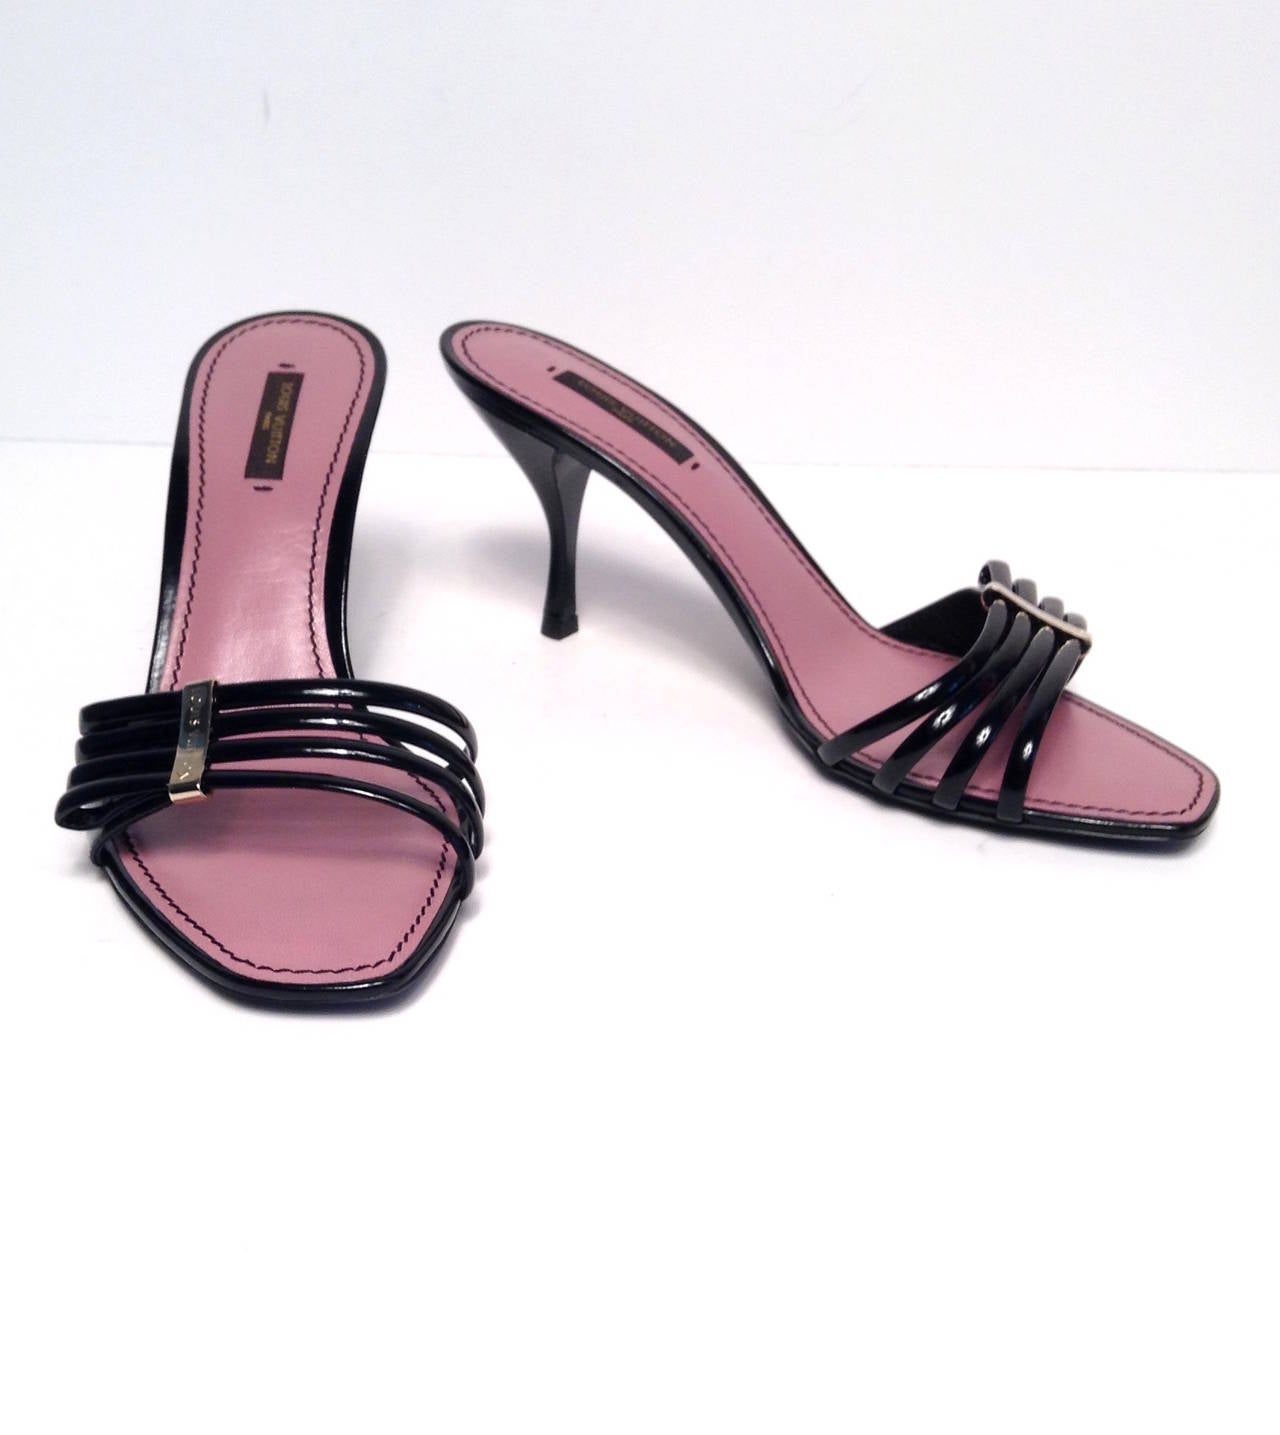 Louis Vuitton Black Patent Cherry Open Toe Mule Size 39/8 In New Condition For Sale In Toronto, Ontario